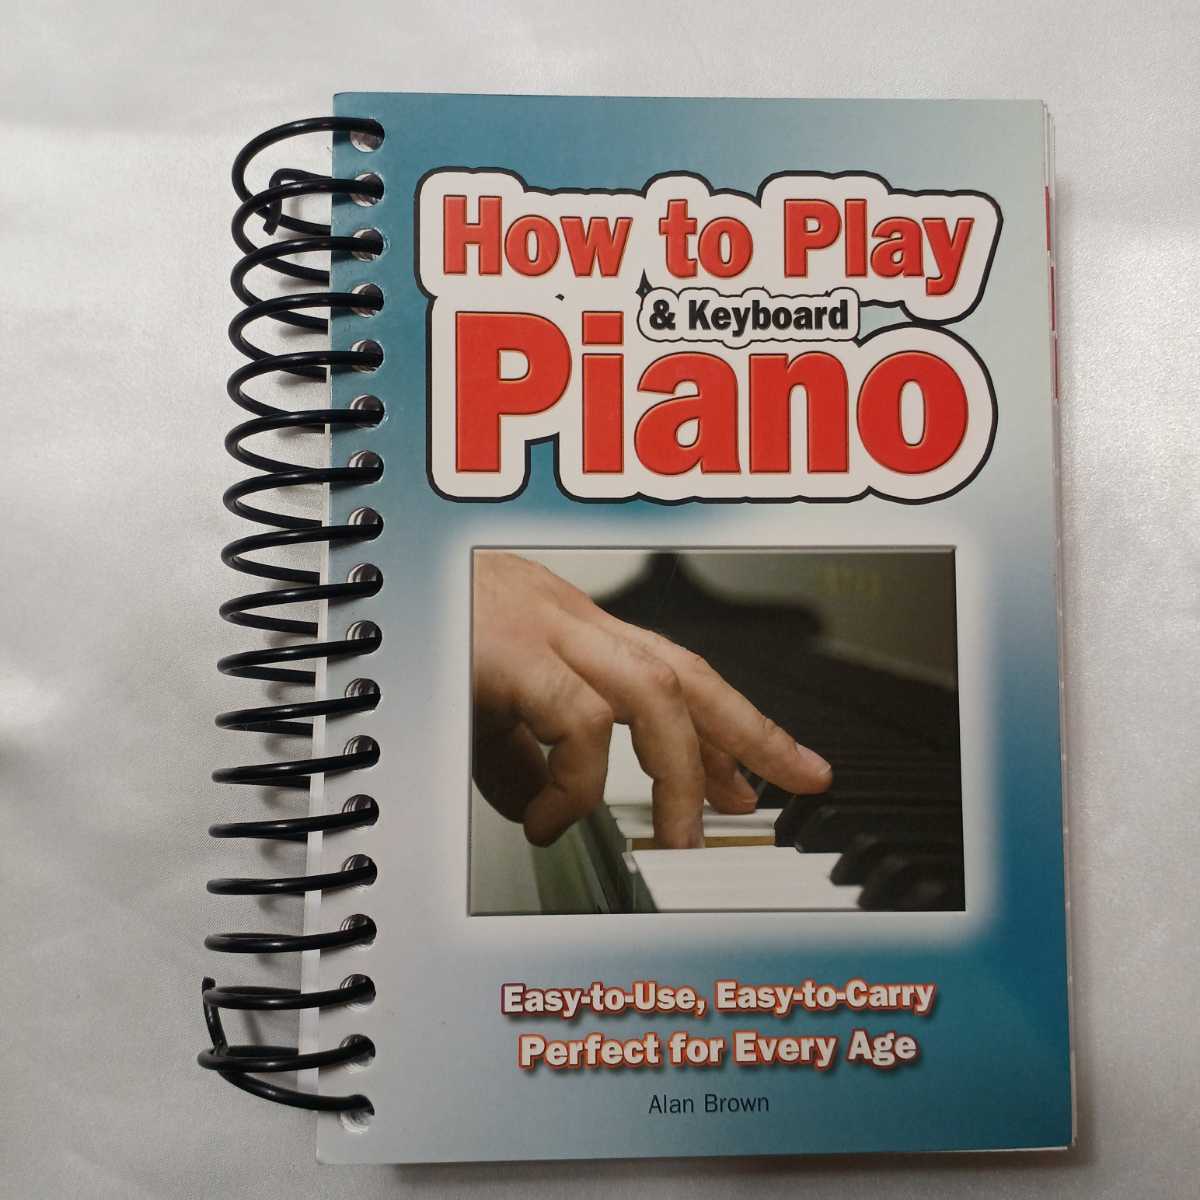 zaa-416♪How to Play Piano & Keyboard: Easy-To-Use, Easy-To-Carry; Perfect for Every Age（Easy-To-Use）ピアノ教書 (2011/01）